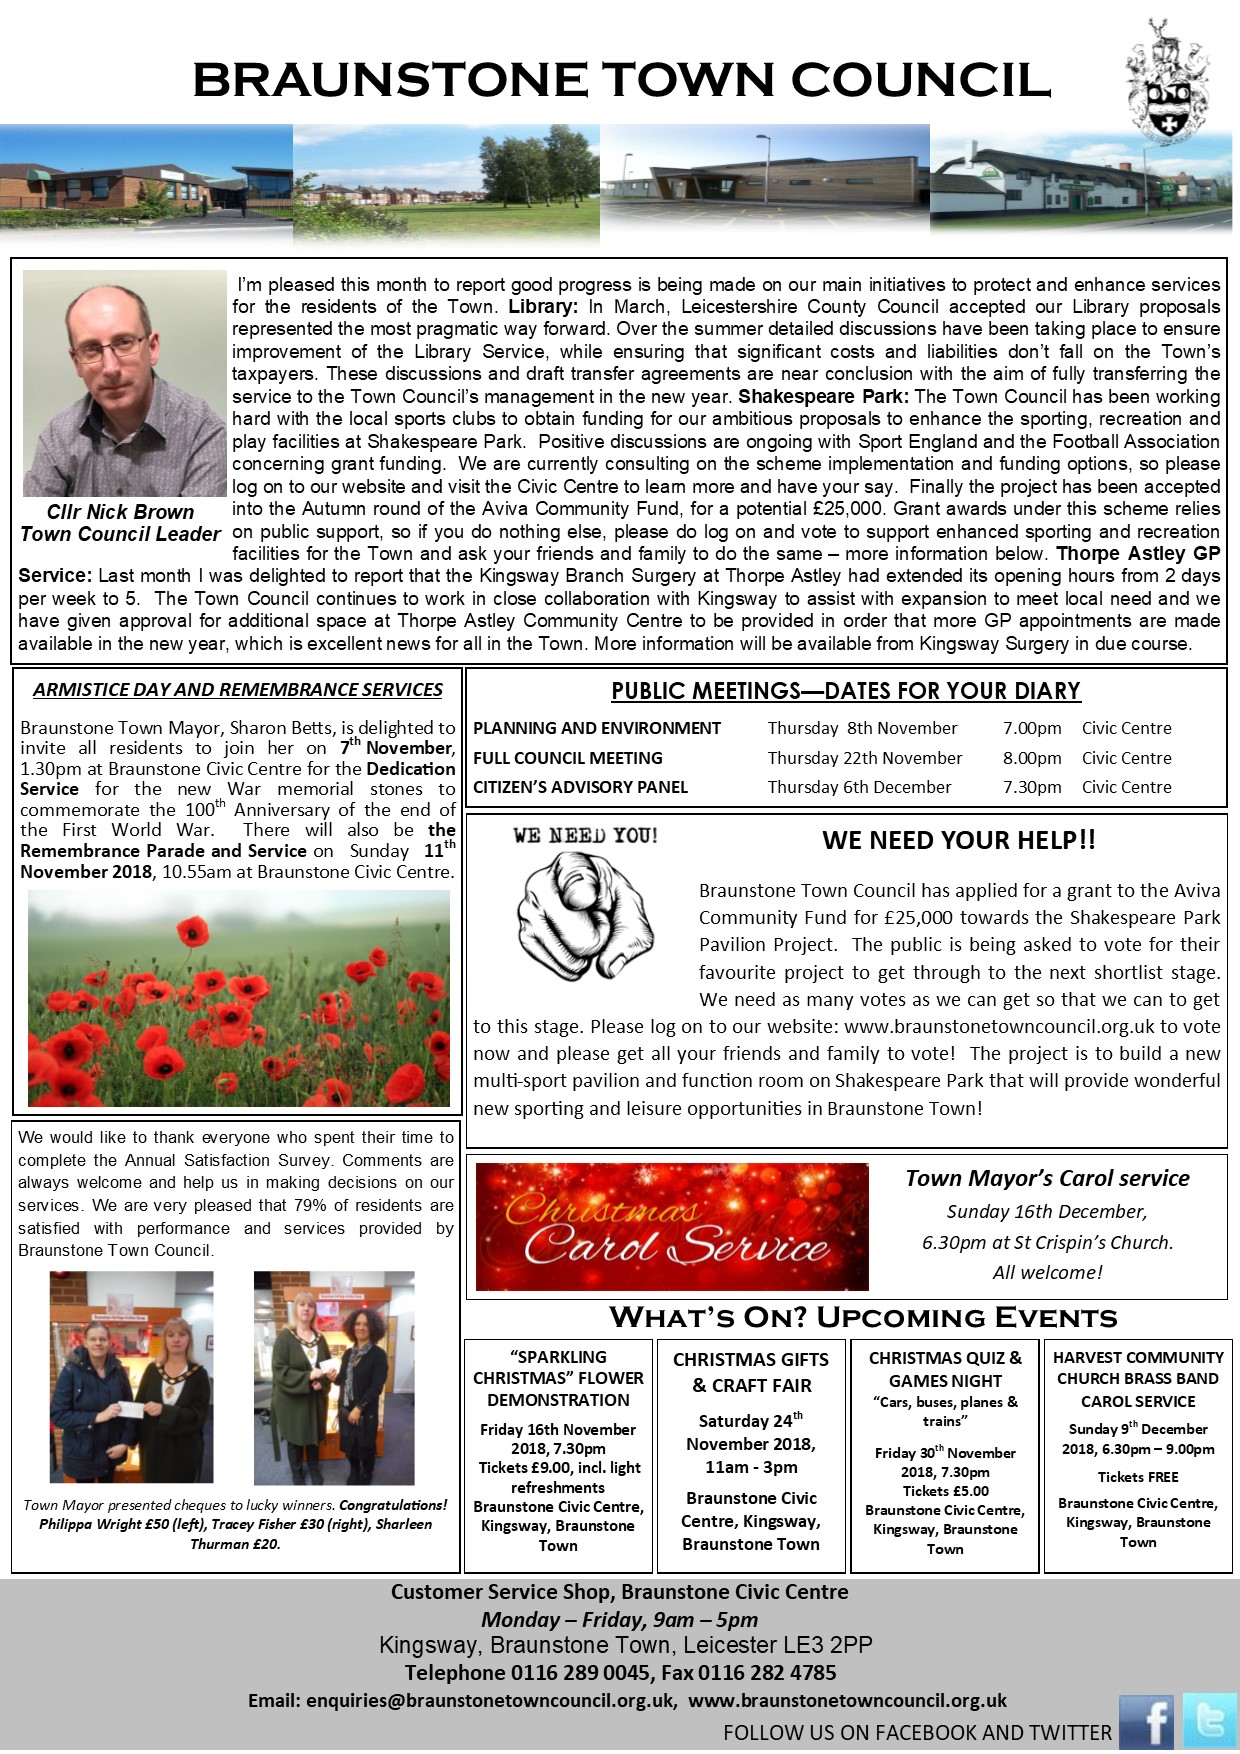 The Town Council article from the November 2018 issue of the Braunstone Life